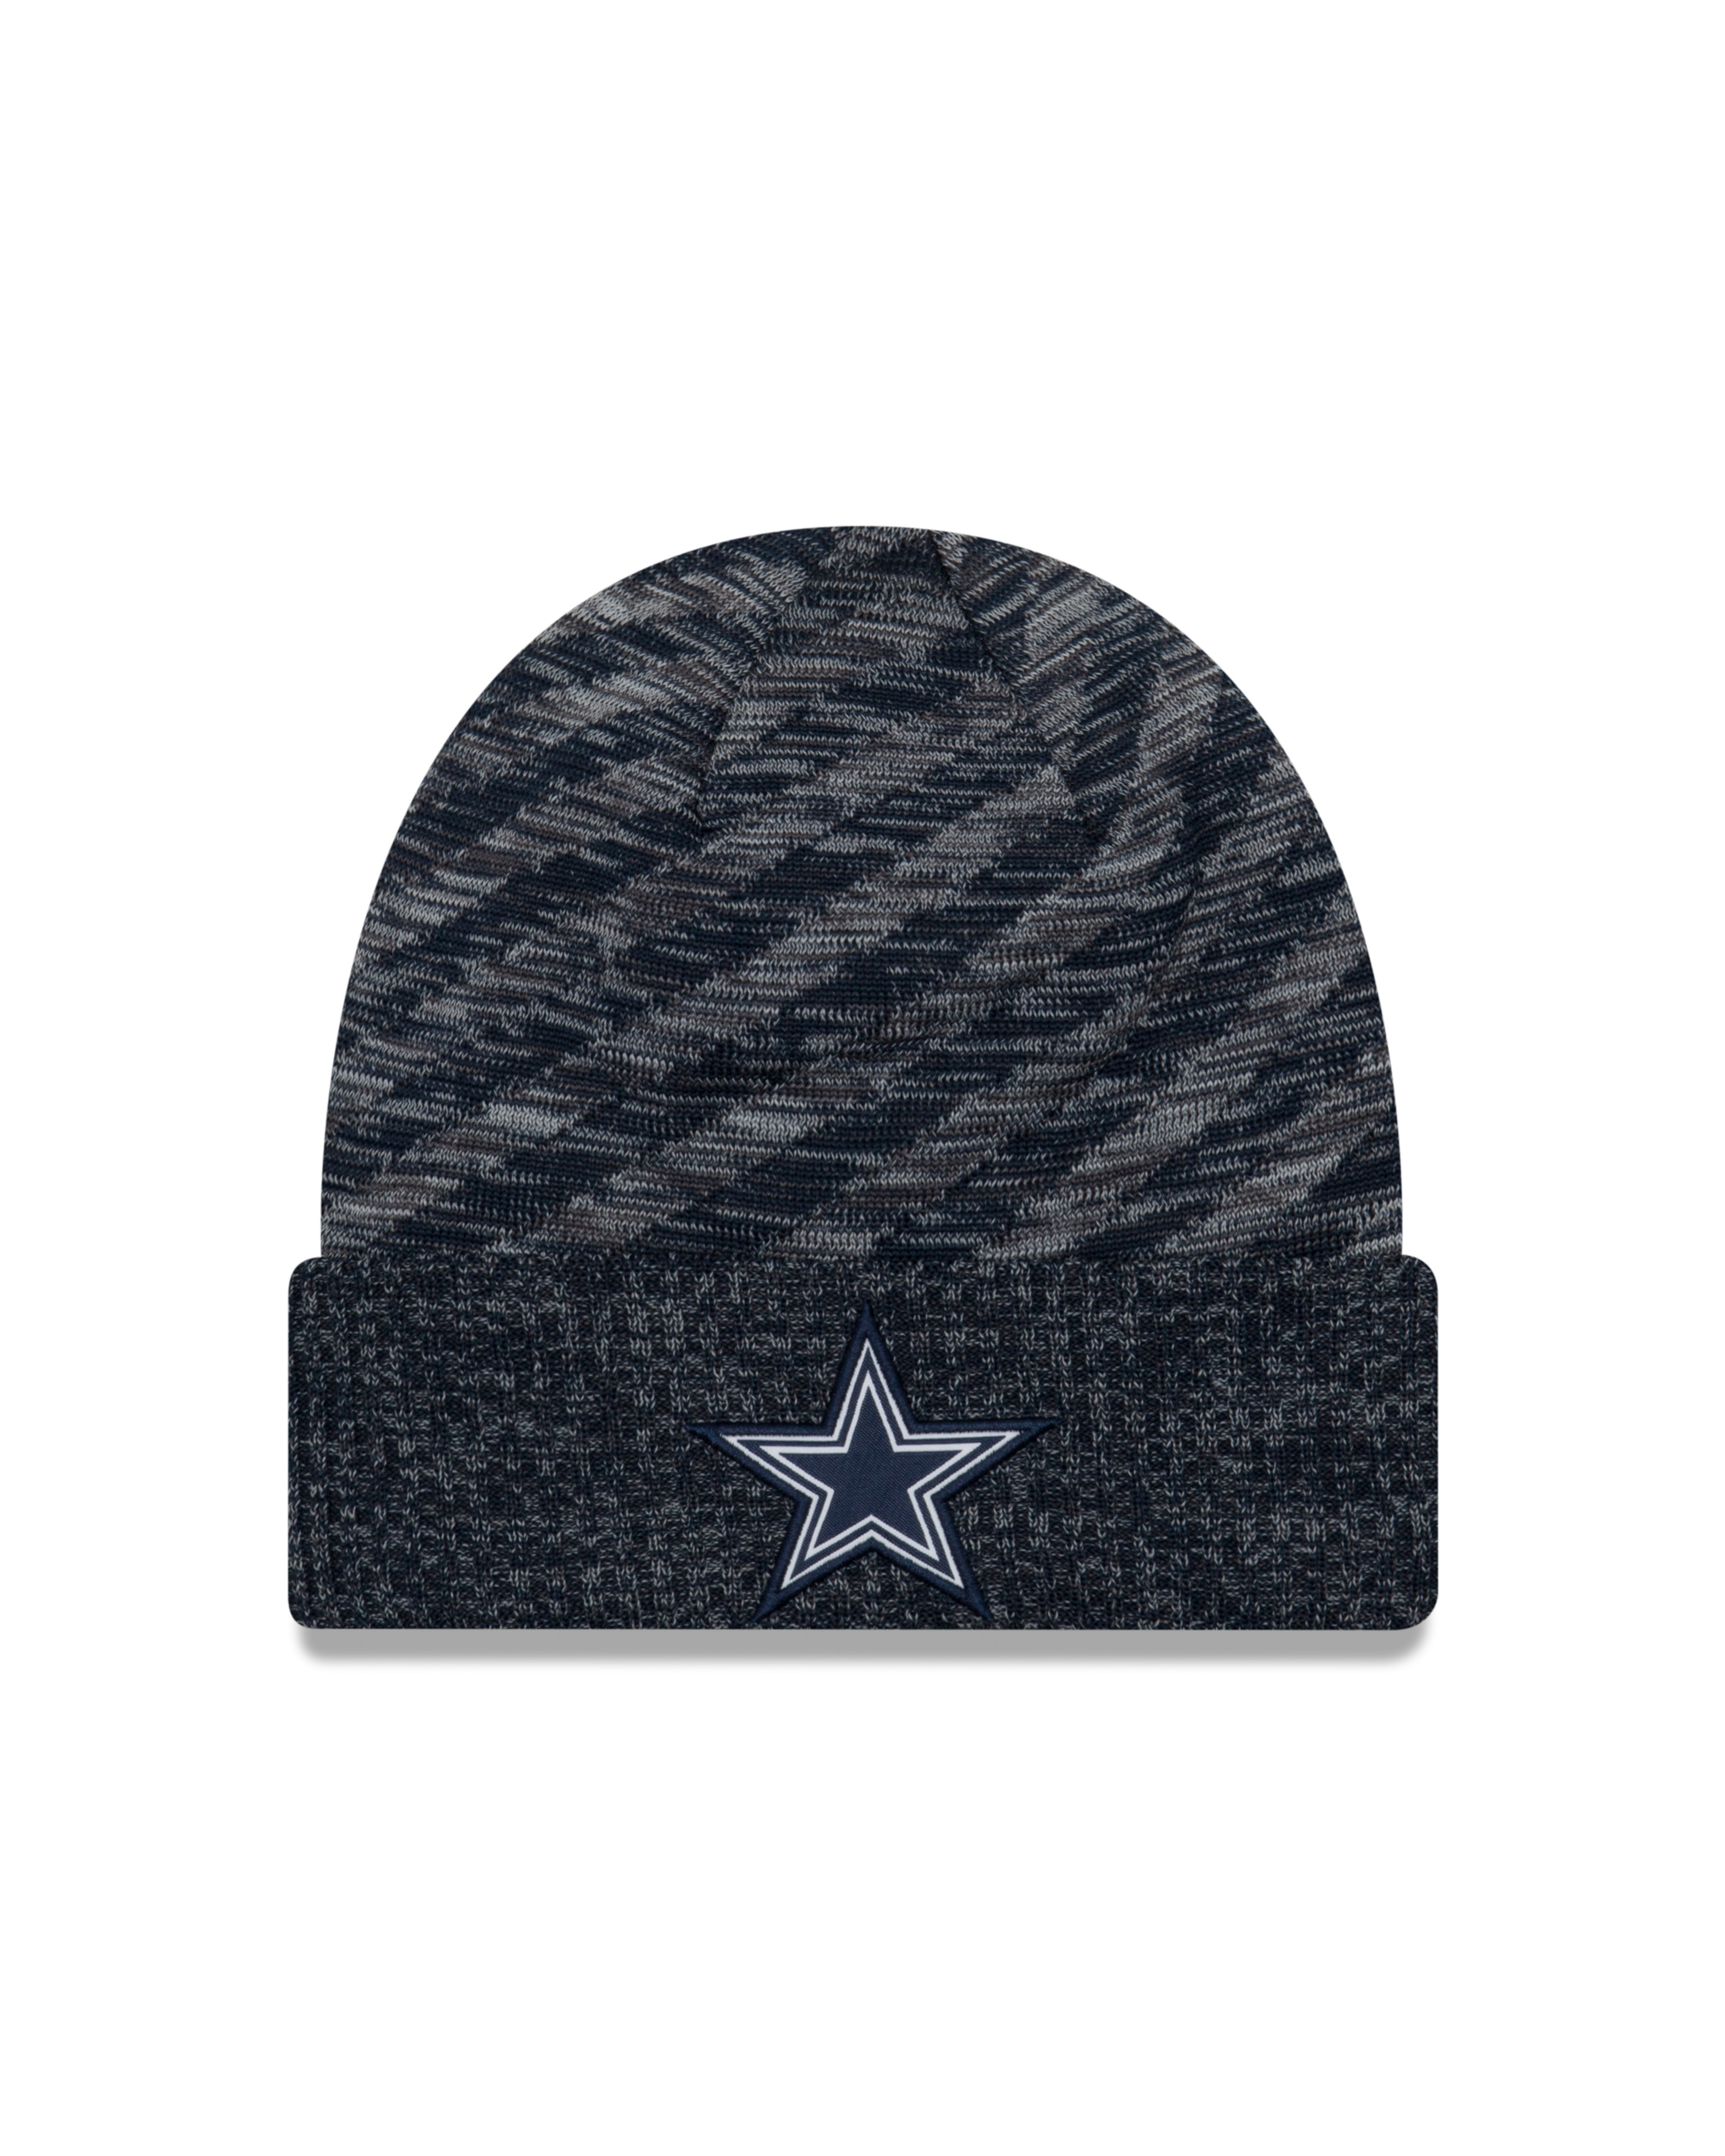 New Era Official NFL Cold Weather Collection #23